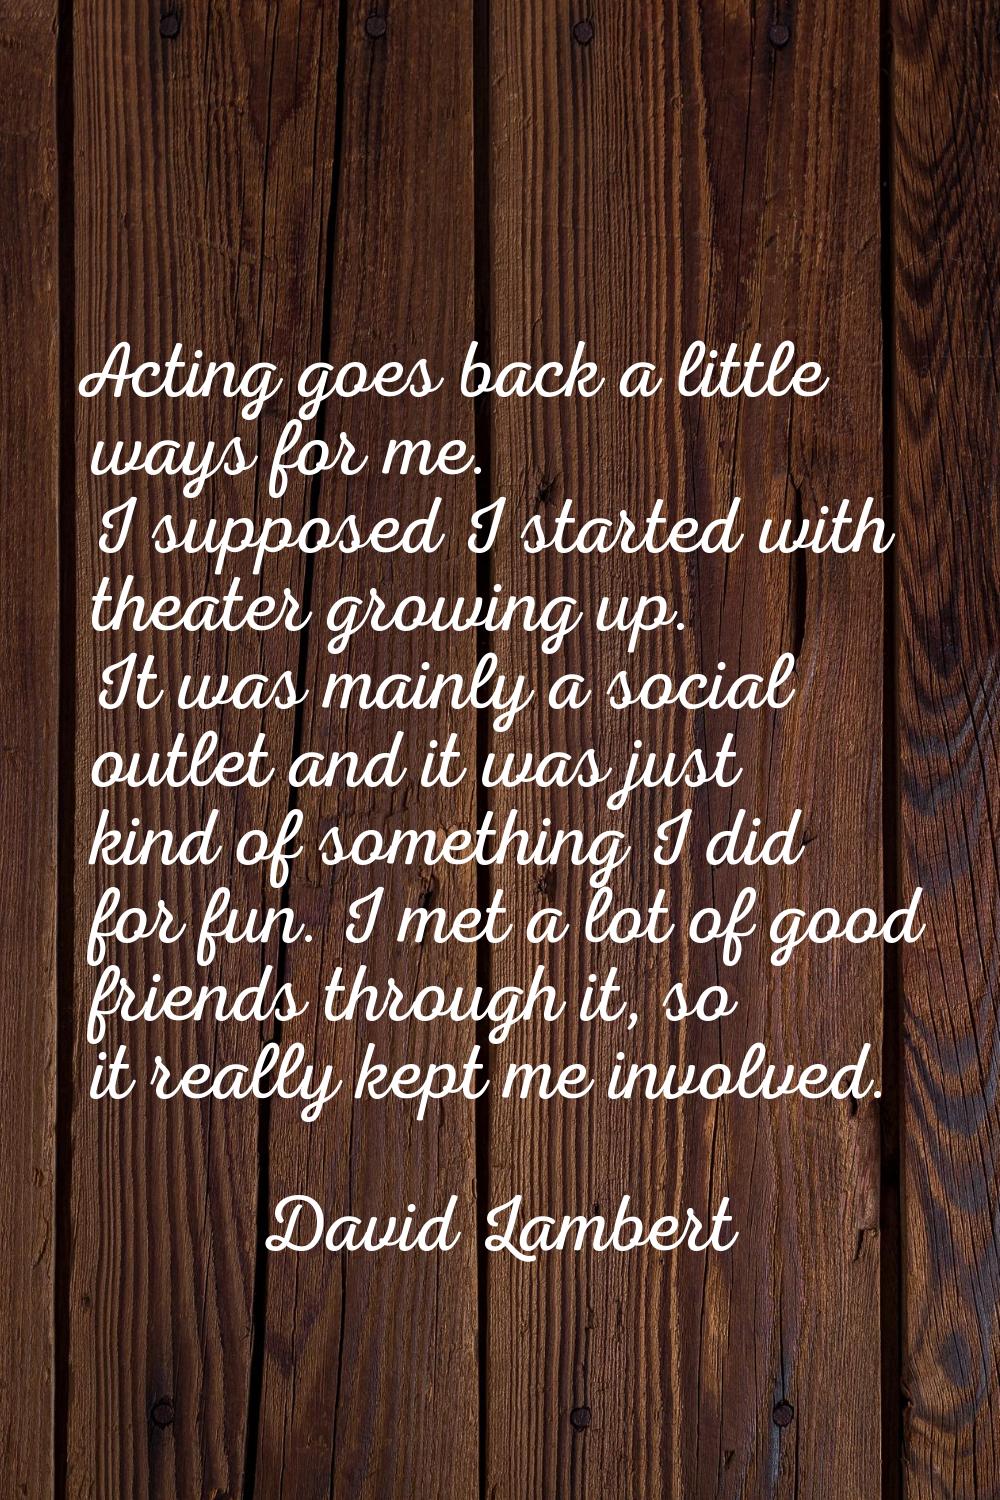 Acting goes back a little ways for me. I supposed I started with theater growing up. It was mainly 